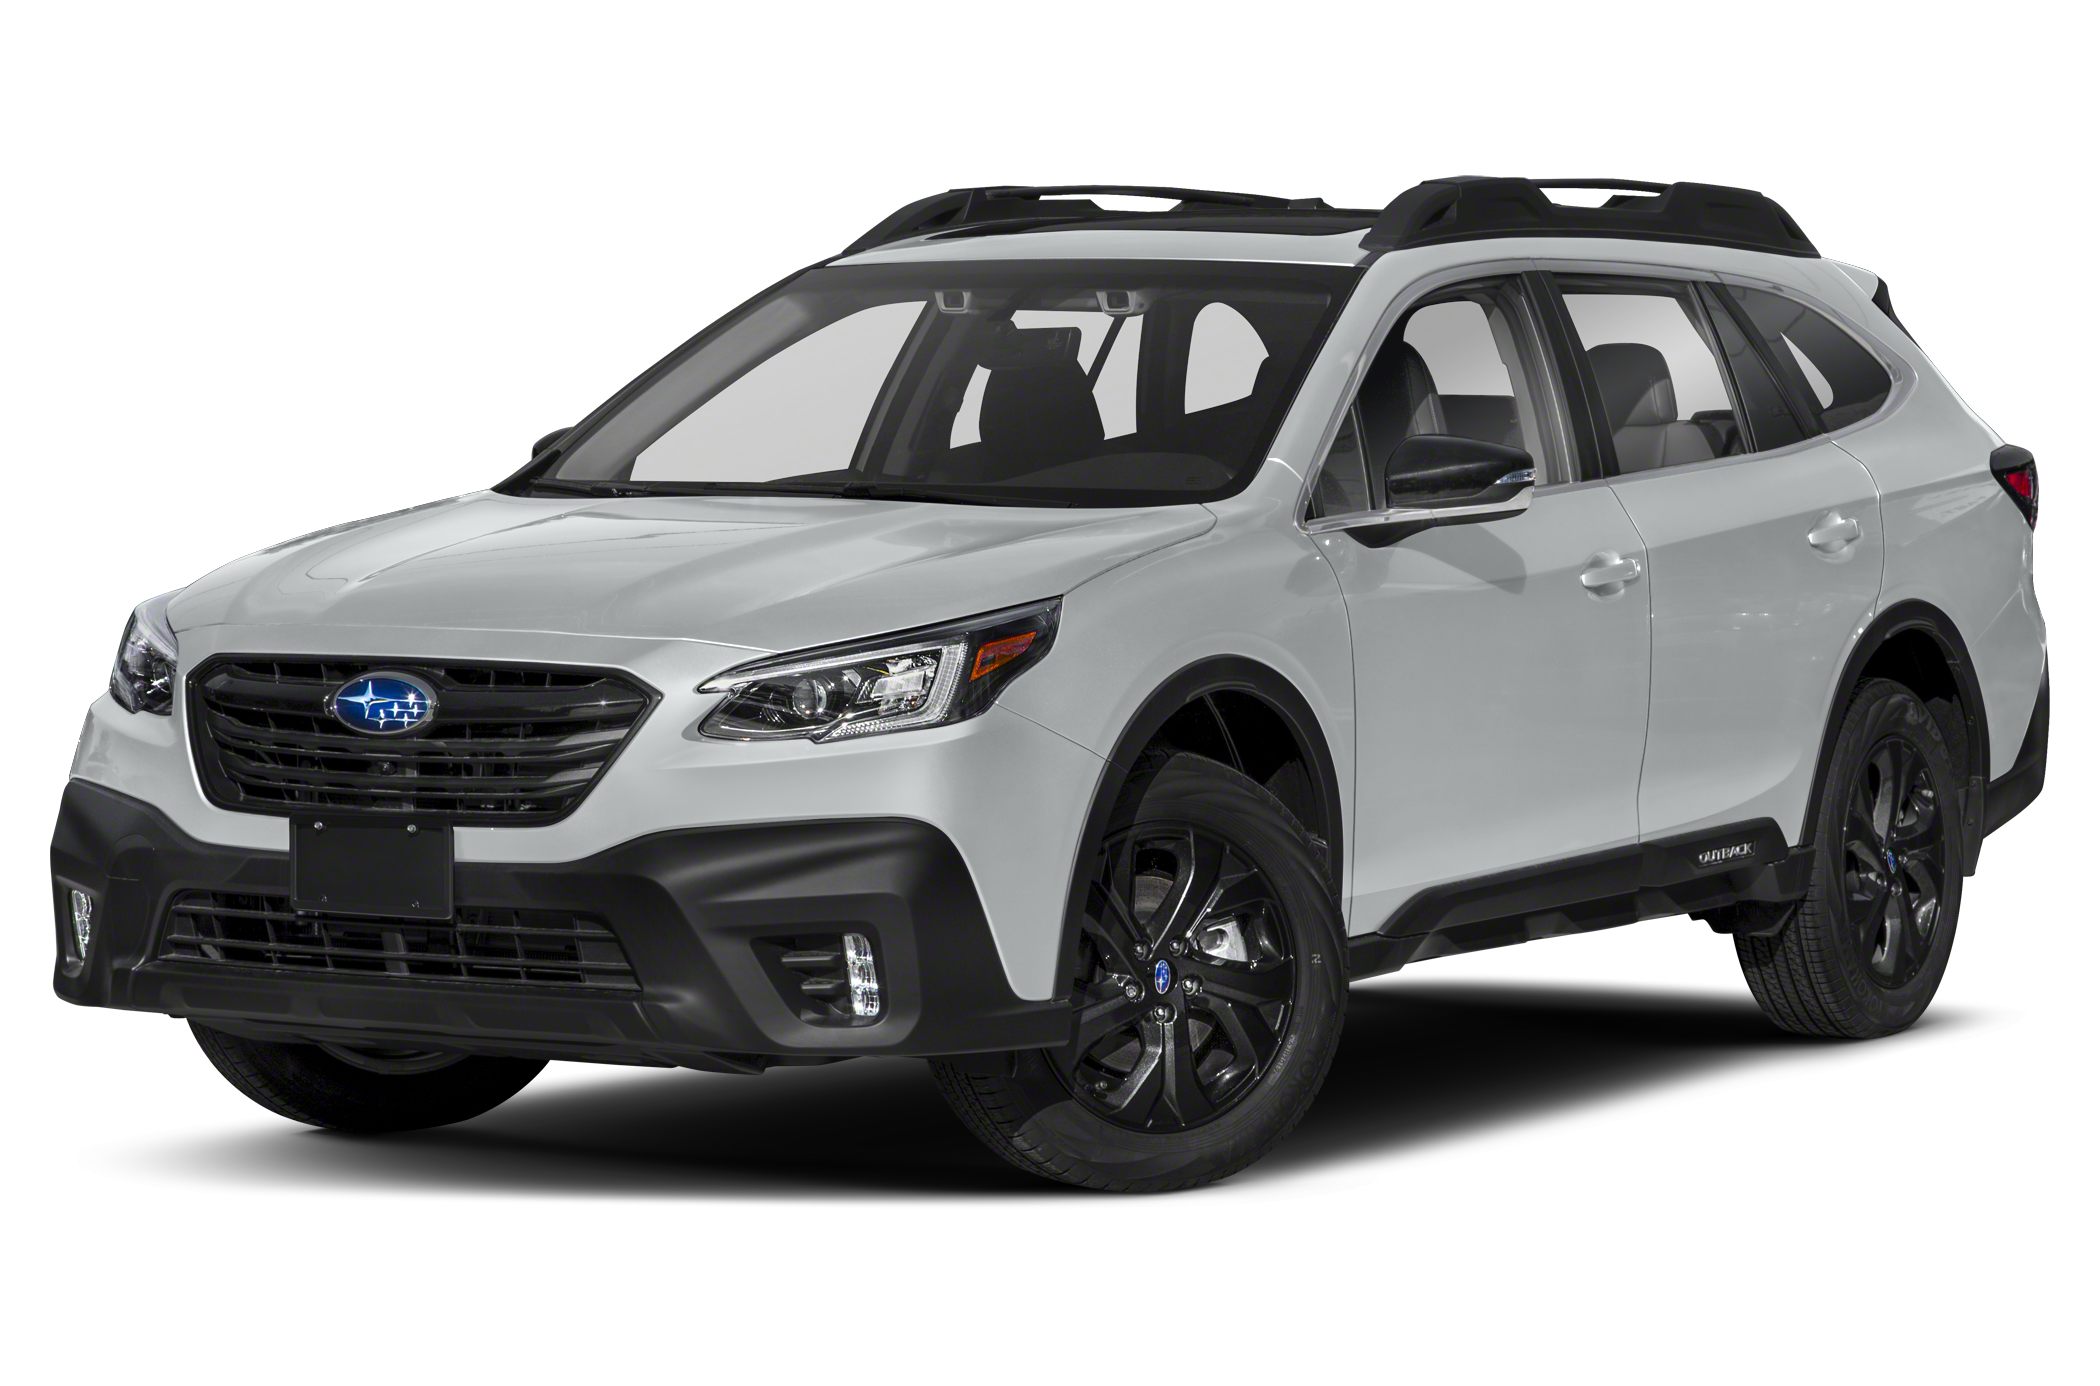 2020 subaru outback onyx edition xt 4dr all wheel drive specs and prices autoblog